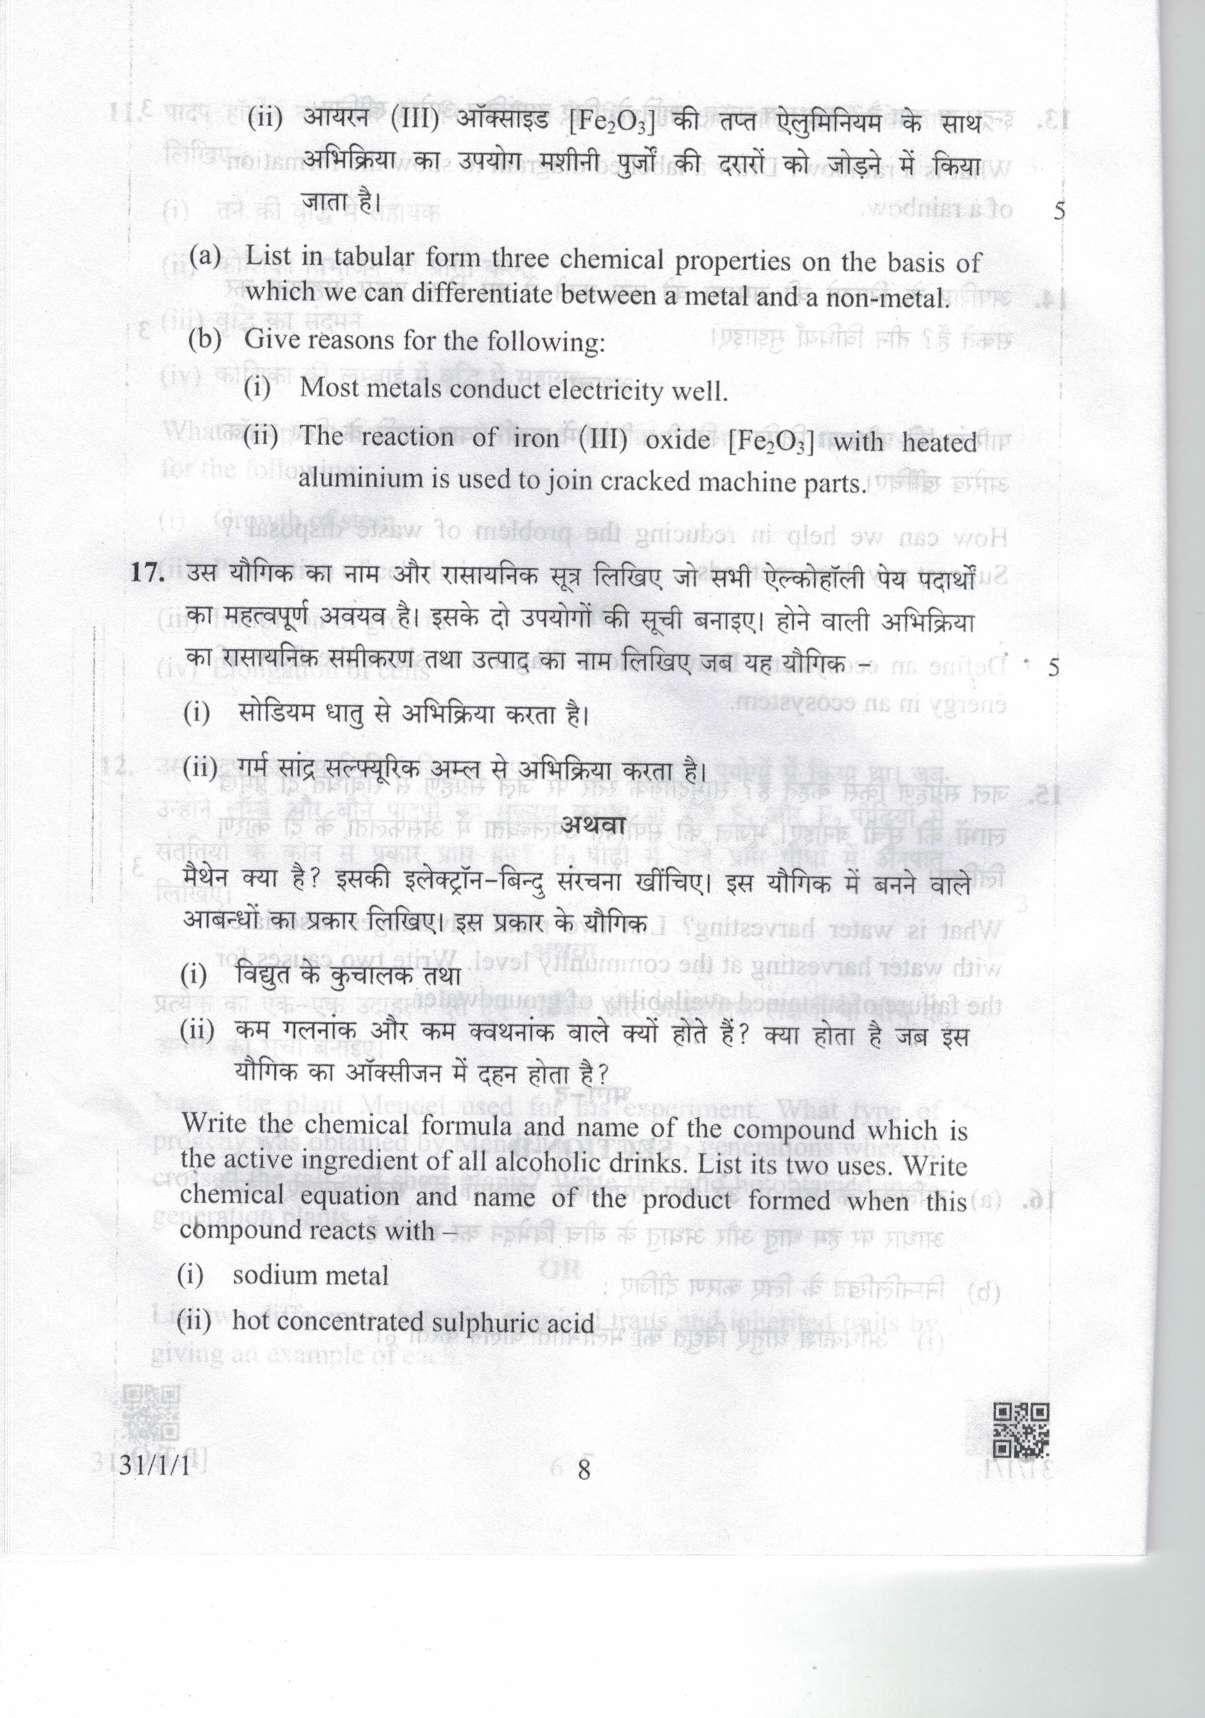 CBSE Class 10 31-1-1 Science 2019 Question Paper - Page 8